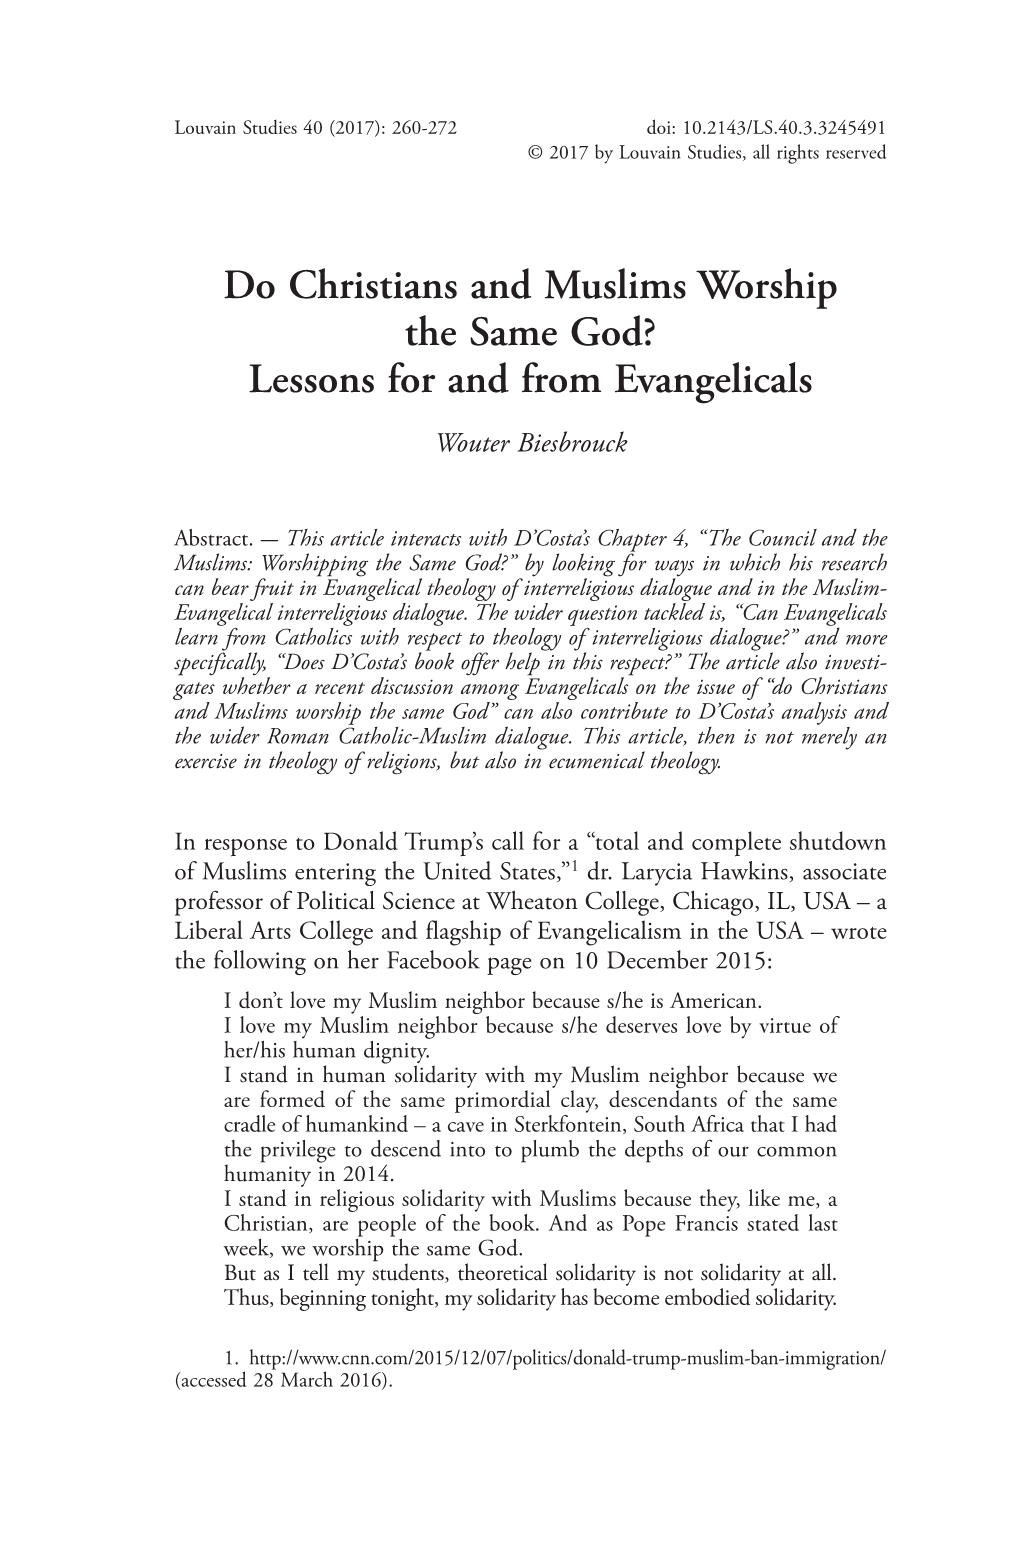 Do Christians and Muslims Worship the Same God? Lessons for and from Evangelicals